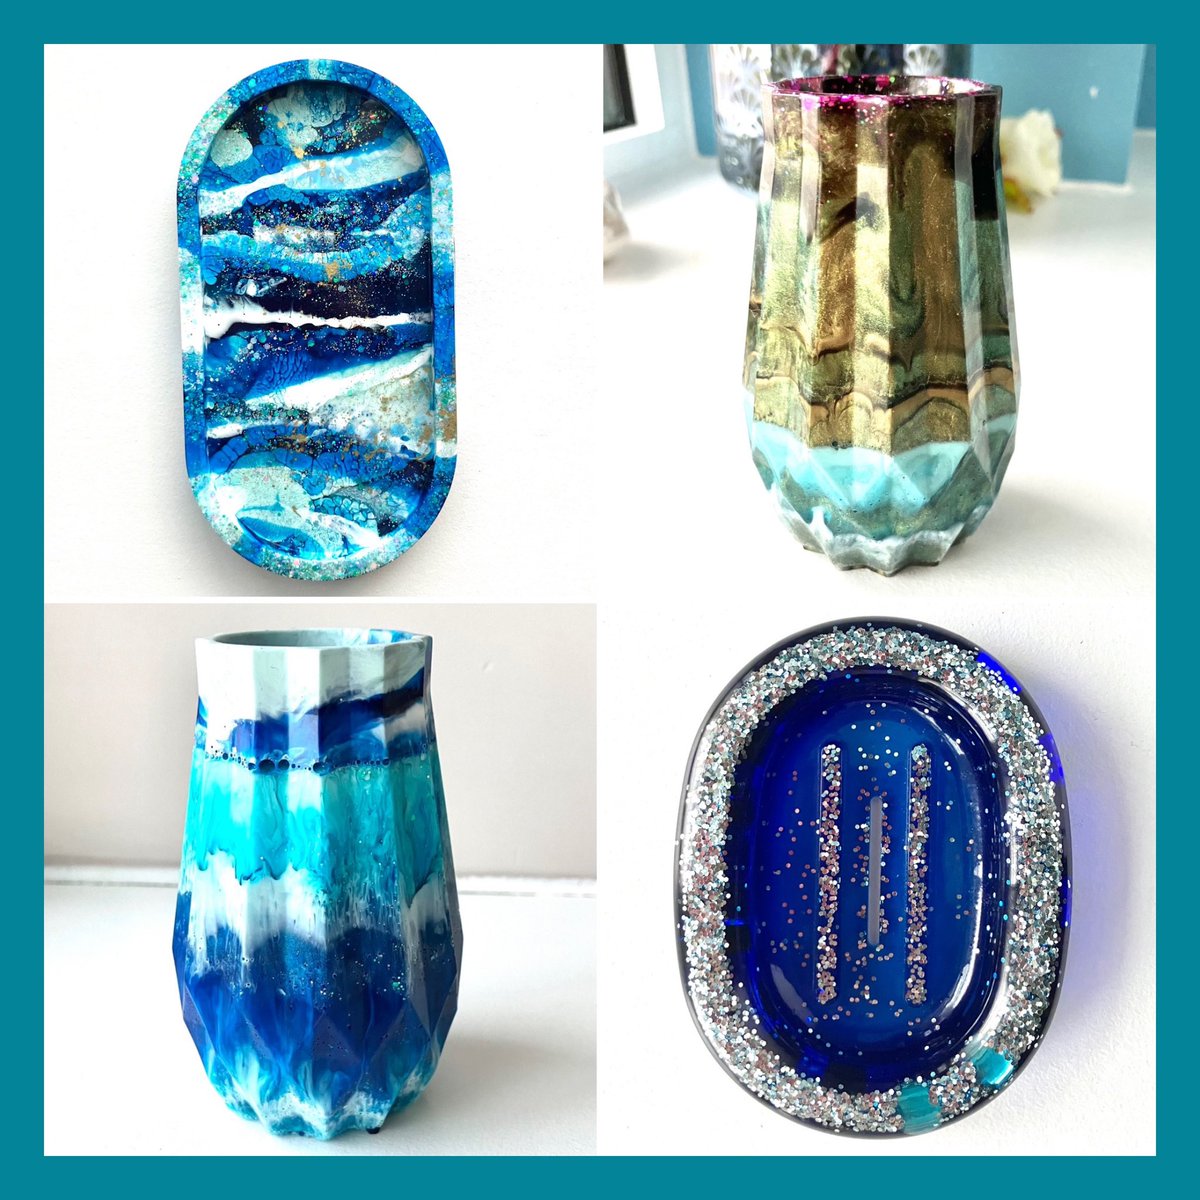 Excited to share a selection of resin designs for the home, unique gifts for any occasion: muresindesigns.etsy.com #earlybiz #elevenseshour #craftbizparty #etsy #resin #handmadegift #etsyfinds